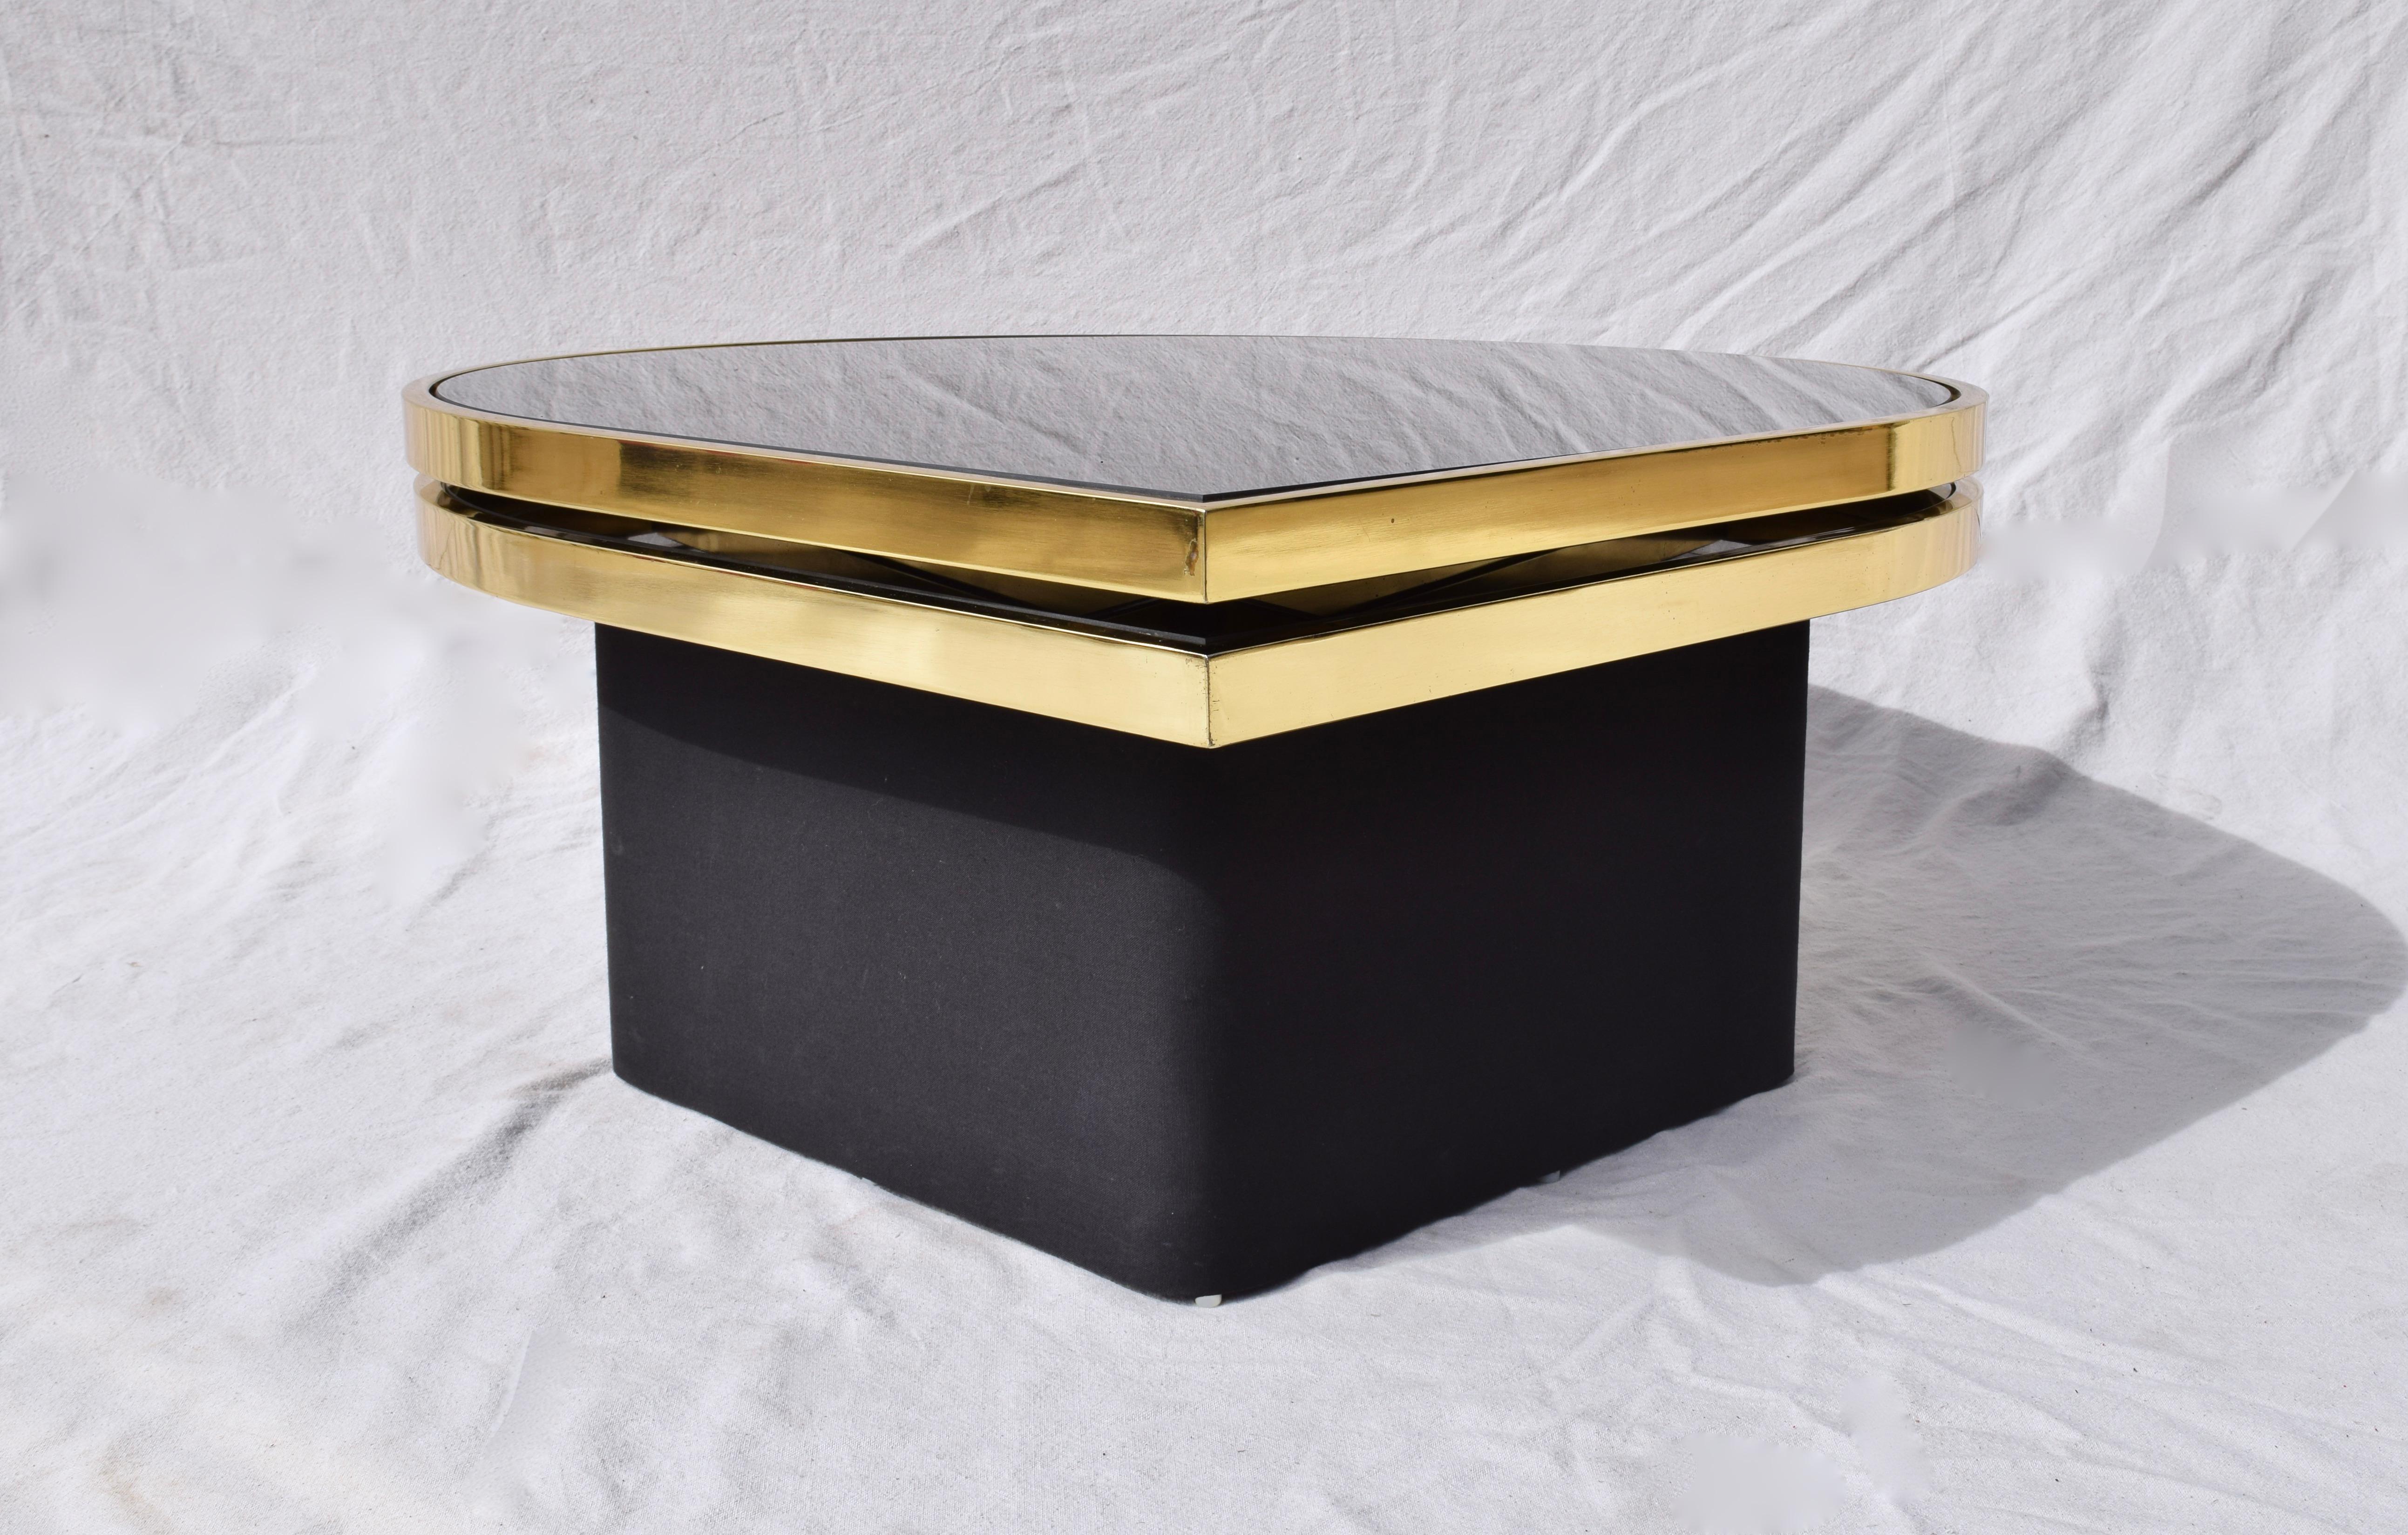 Elegant reverse black painted glass and brass cocktail or coffee table with floating upholstered base designed and manufactured by Richard Barry for Design Institute of America (DIA). The top of two striking teardrop surfaces swivels smoothly